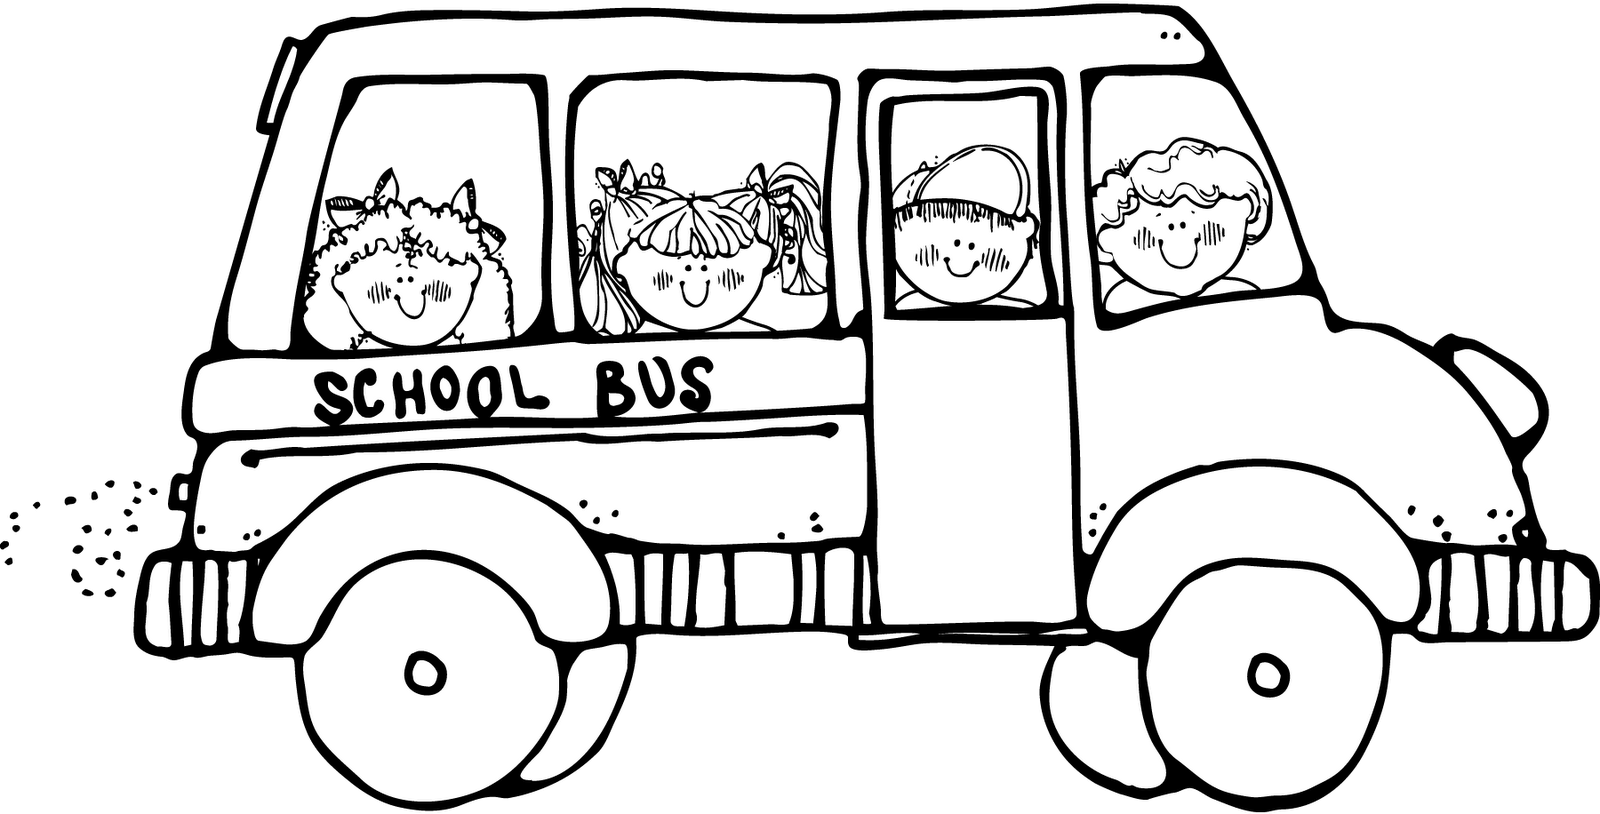 Cool School Bus Safety Coloring Pages Page | Laptopezine.com